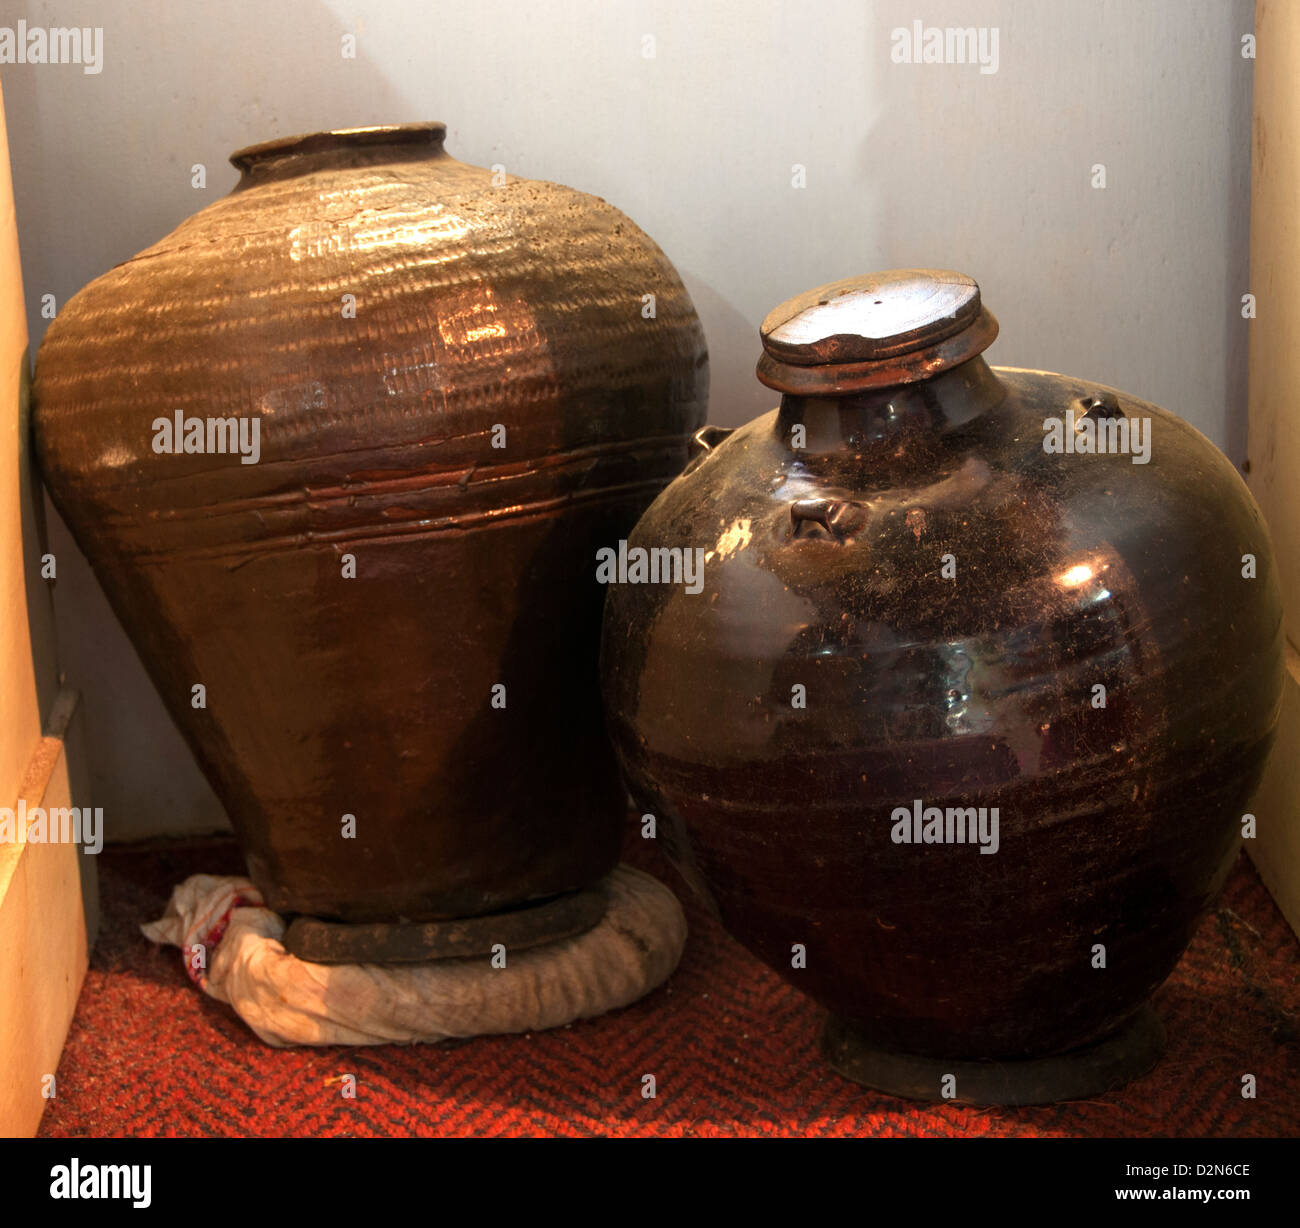 Traditional Chinese jars used for storing pickle in kerala Stock Photo